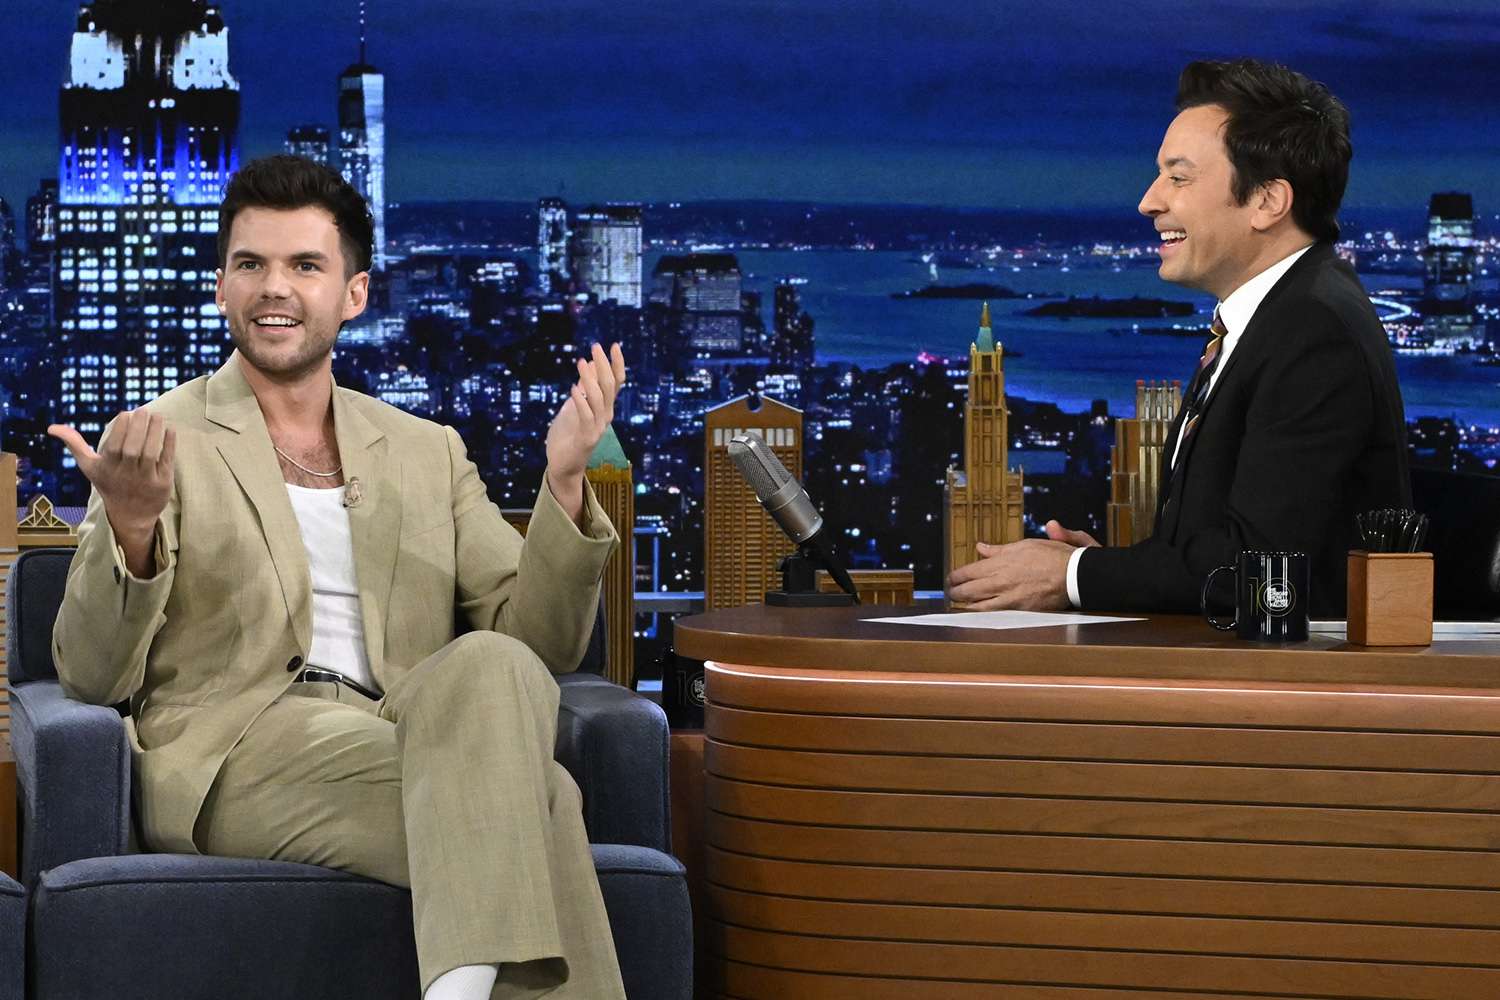 Luke Newton during an interview with host Jimmy Fallon on THE TONIGHT SHOW STARRING JIMMY FALLON